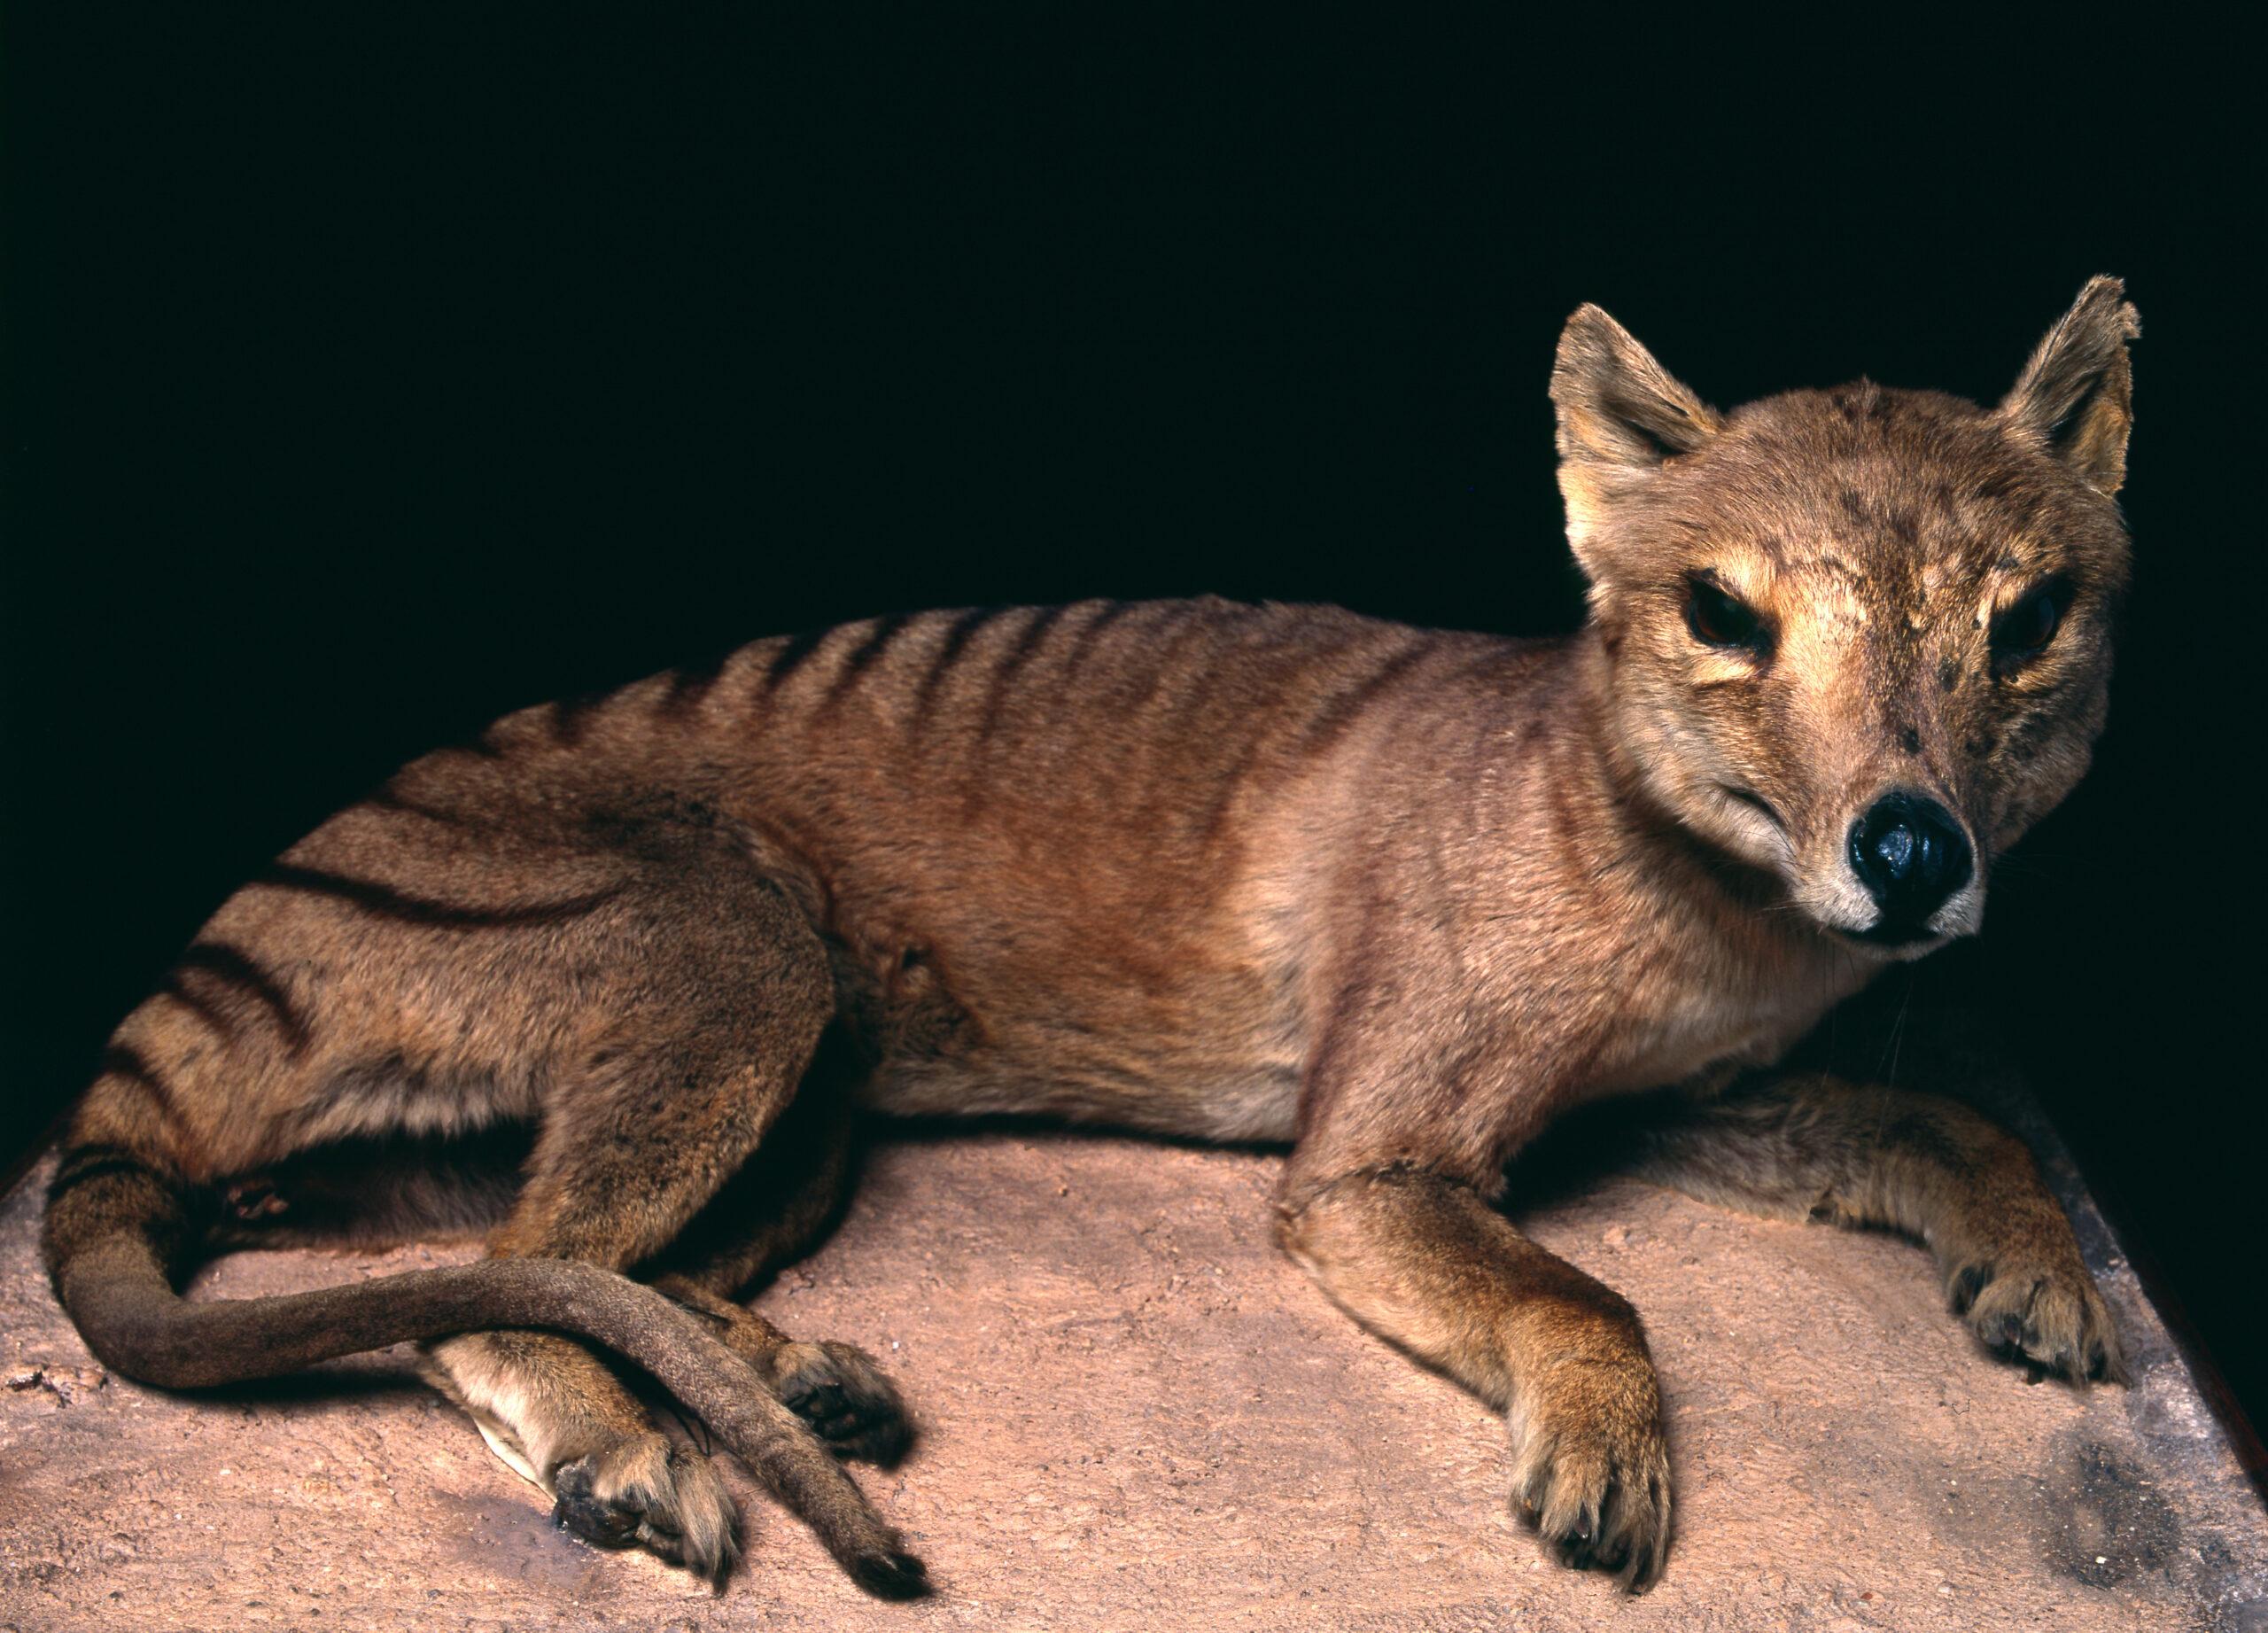 Long-extinct Tasmanian tiger may still be alive and prowling the